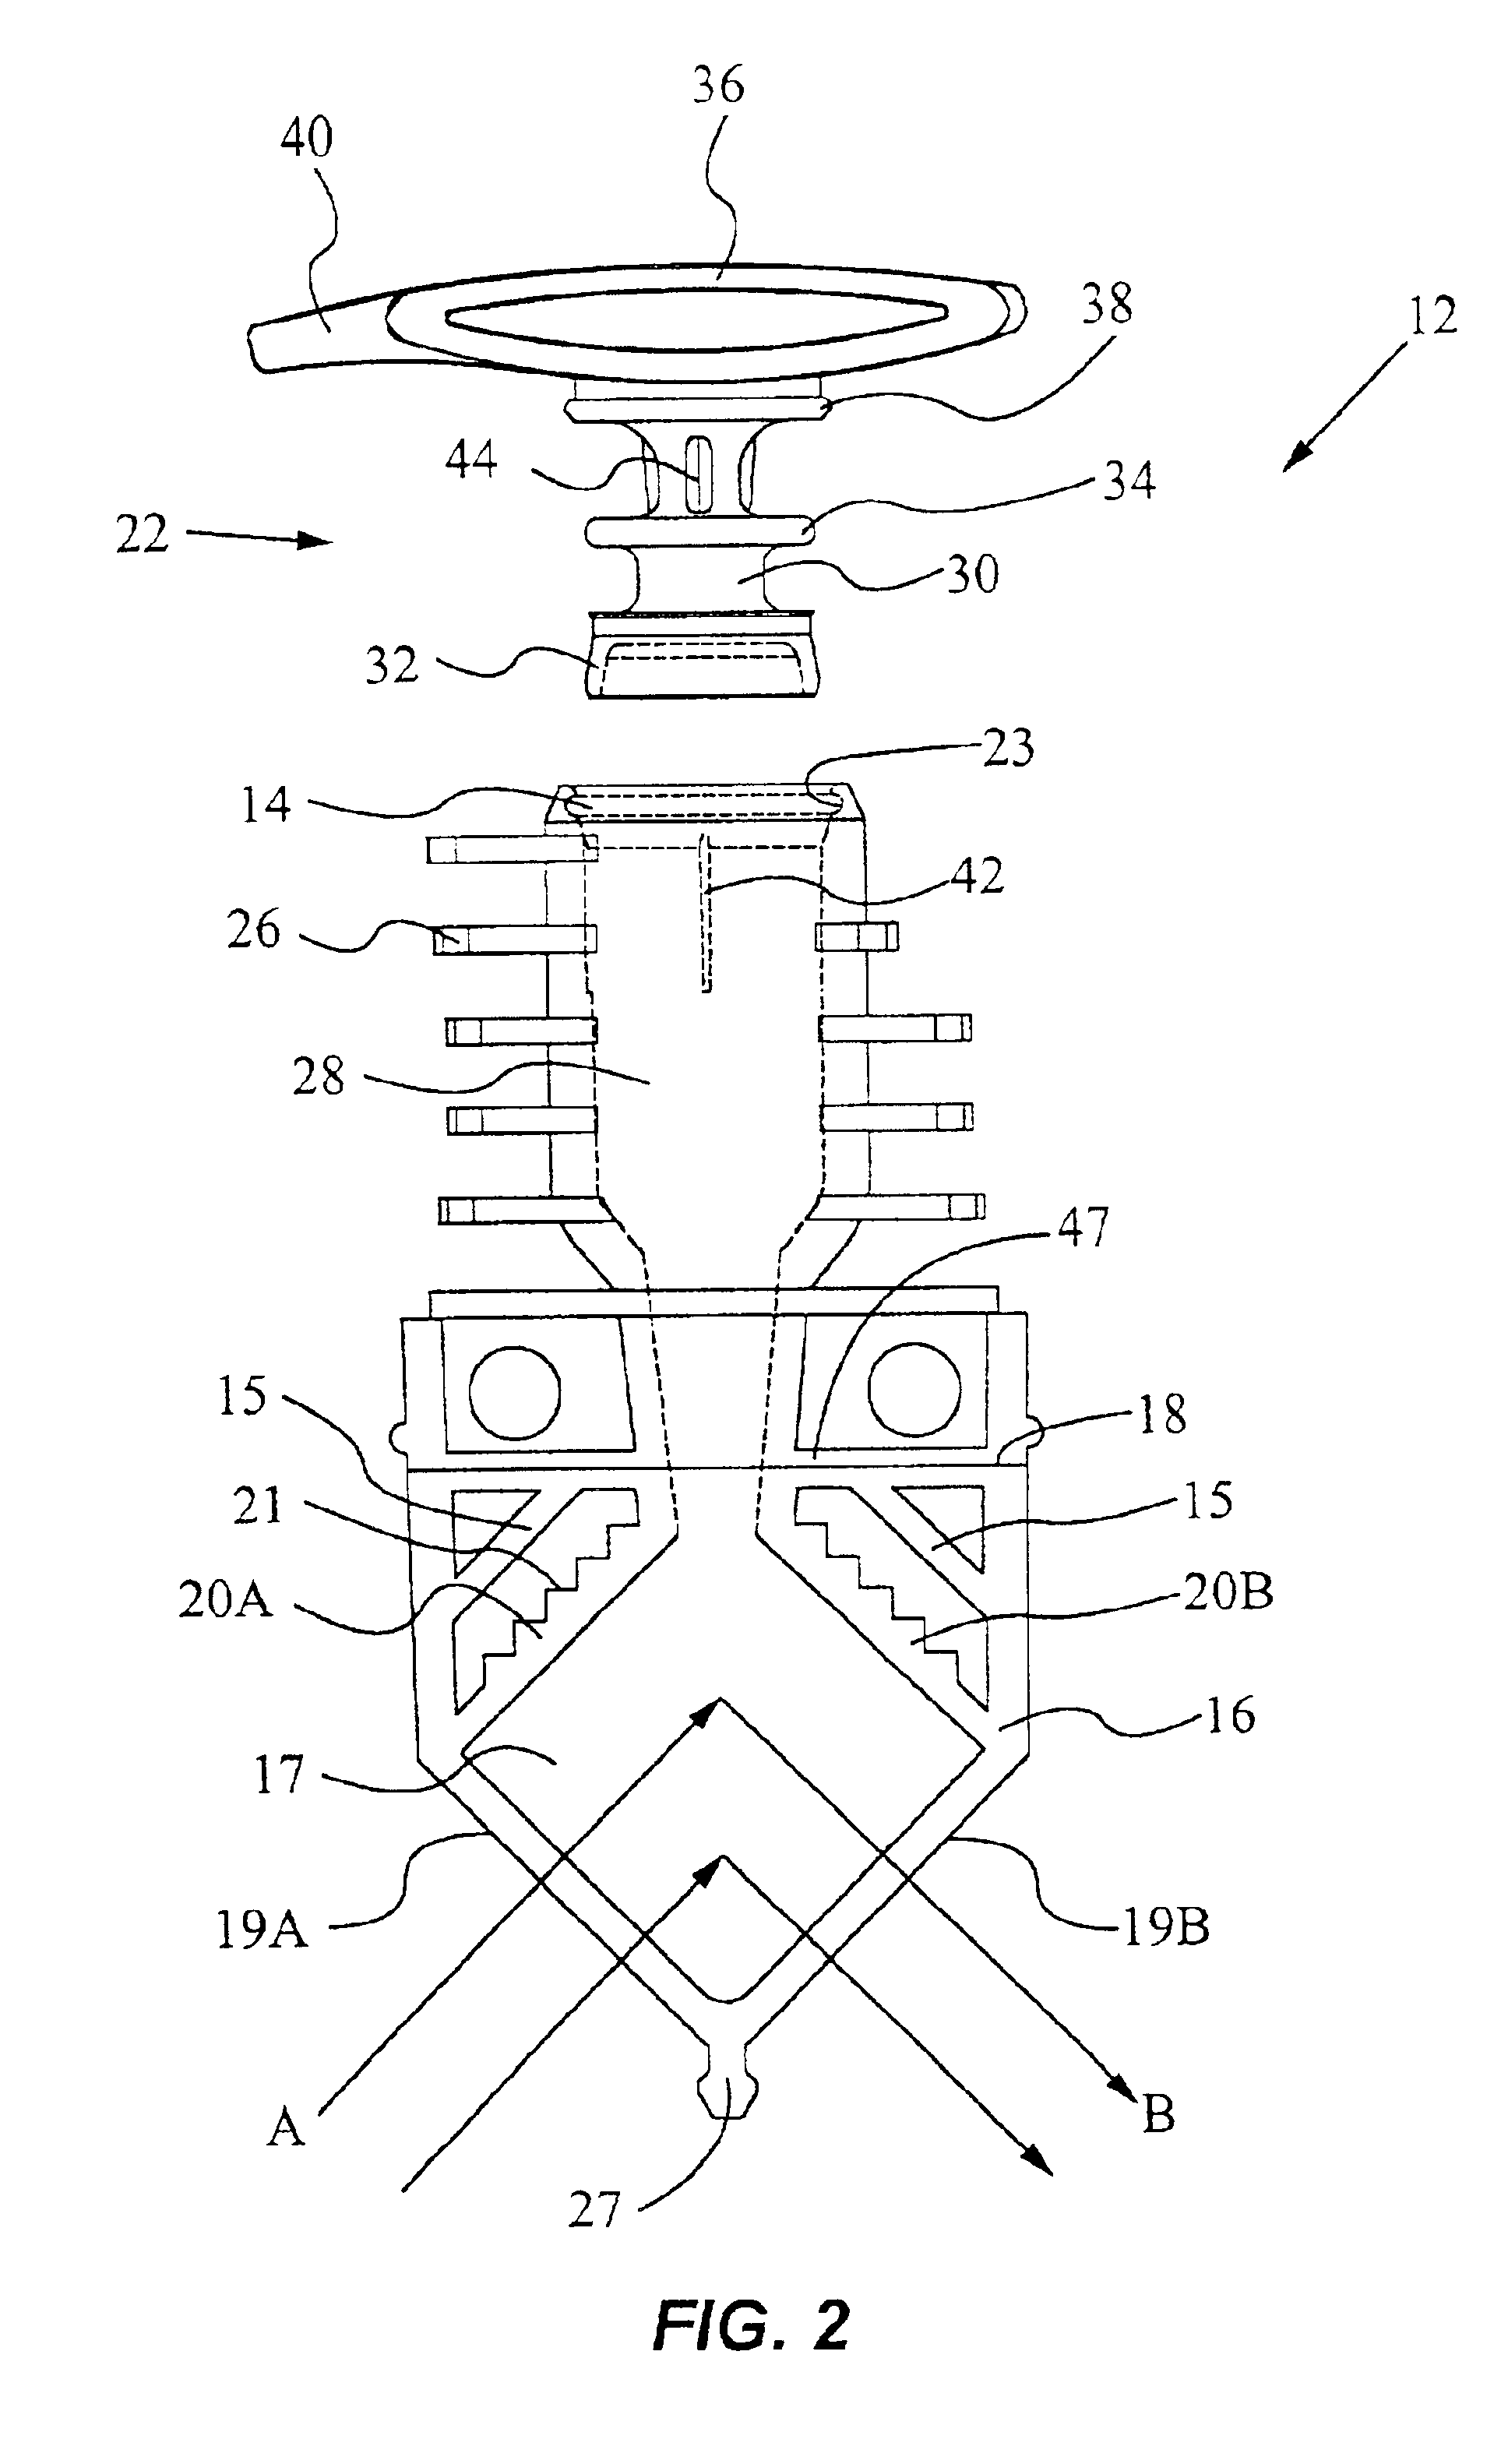 Apparatus for analysis of a nucleic acid amplification reaction